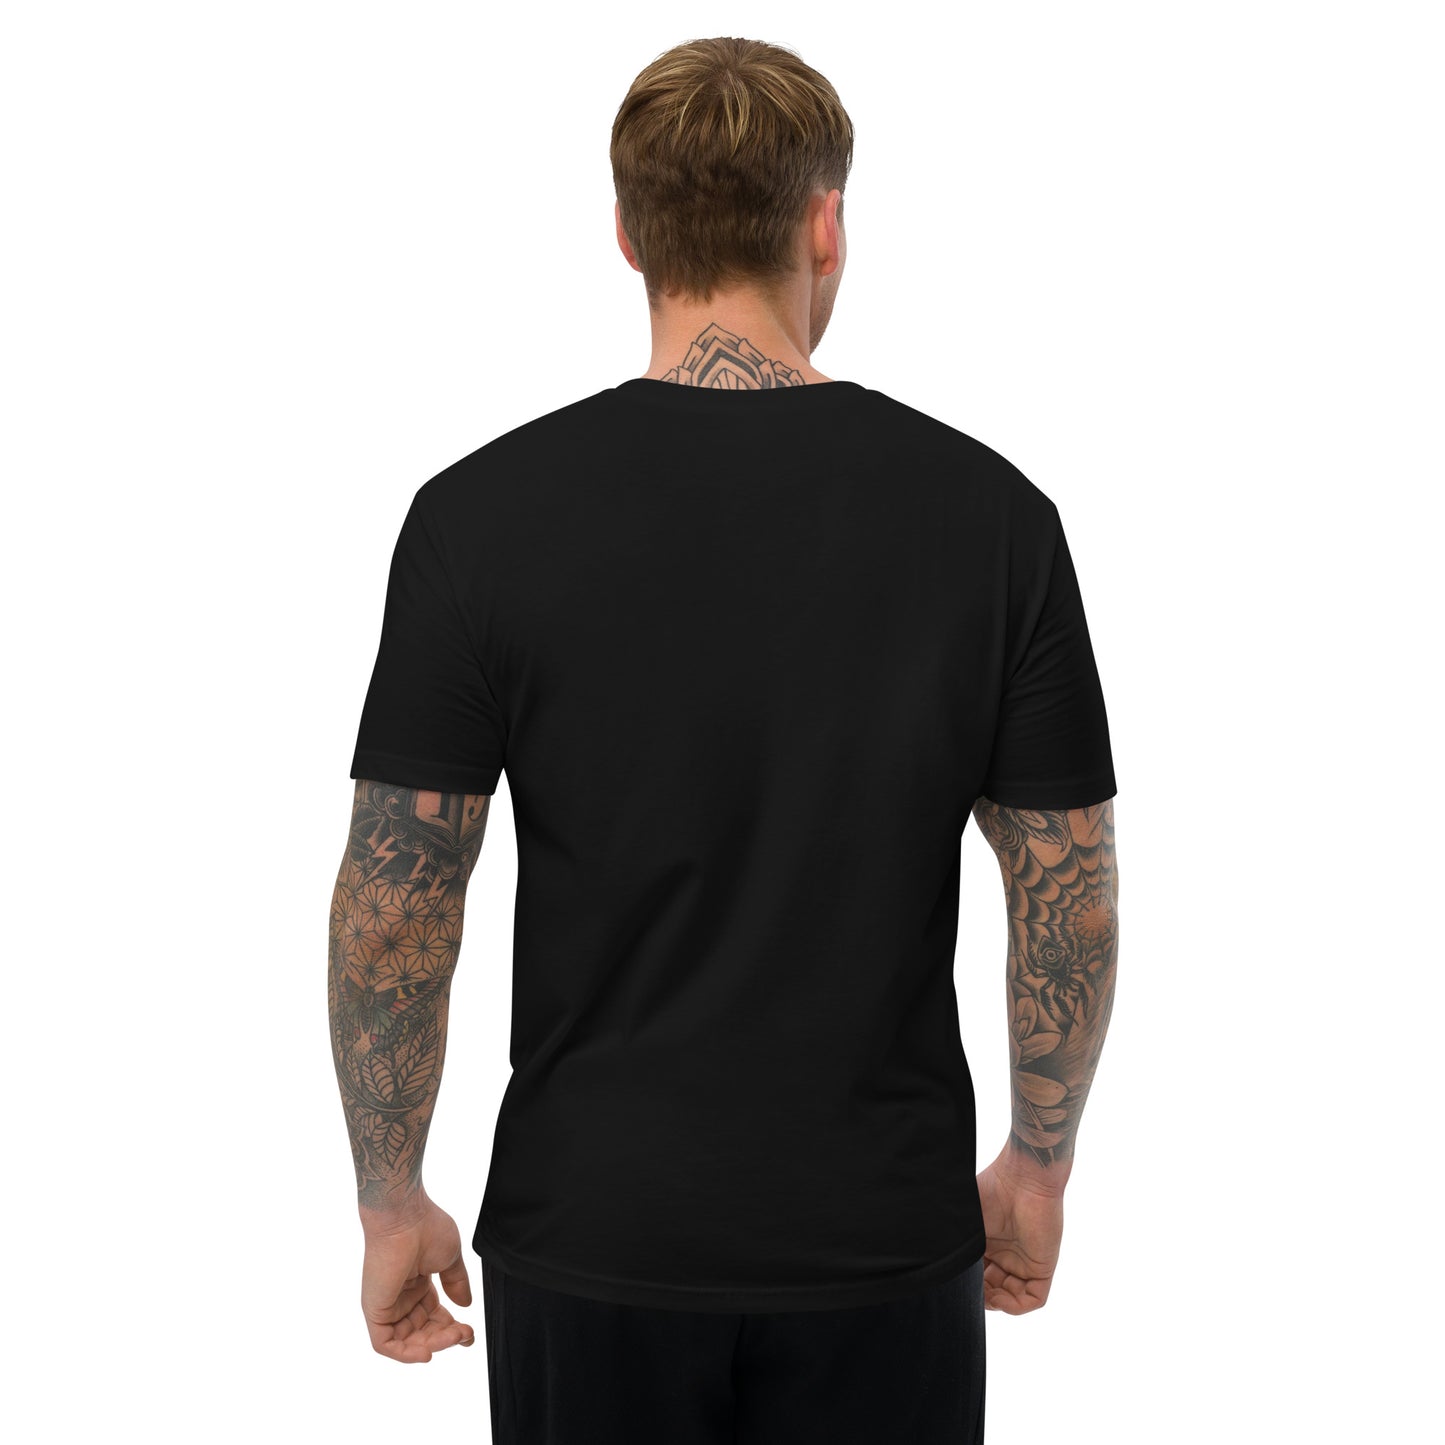 FIRE BLACK Fitted Short Sleeve T-shirt